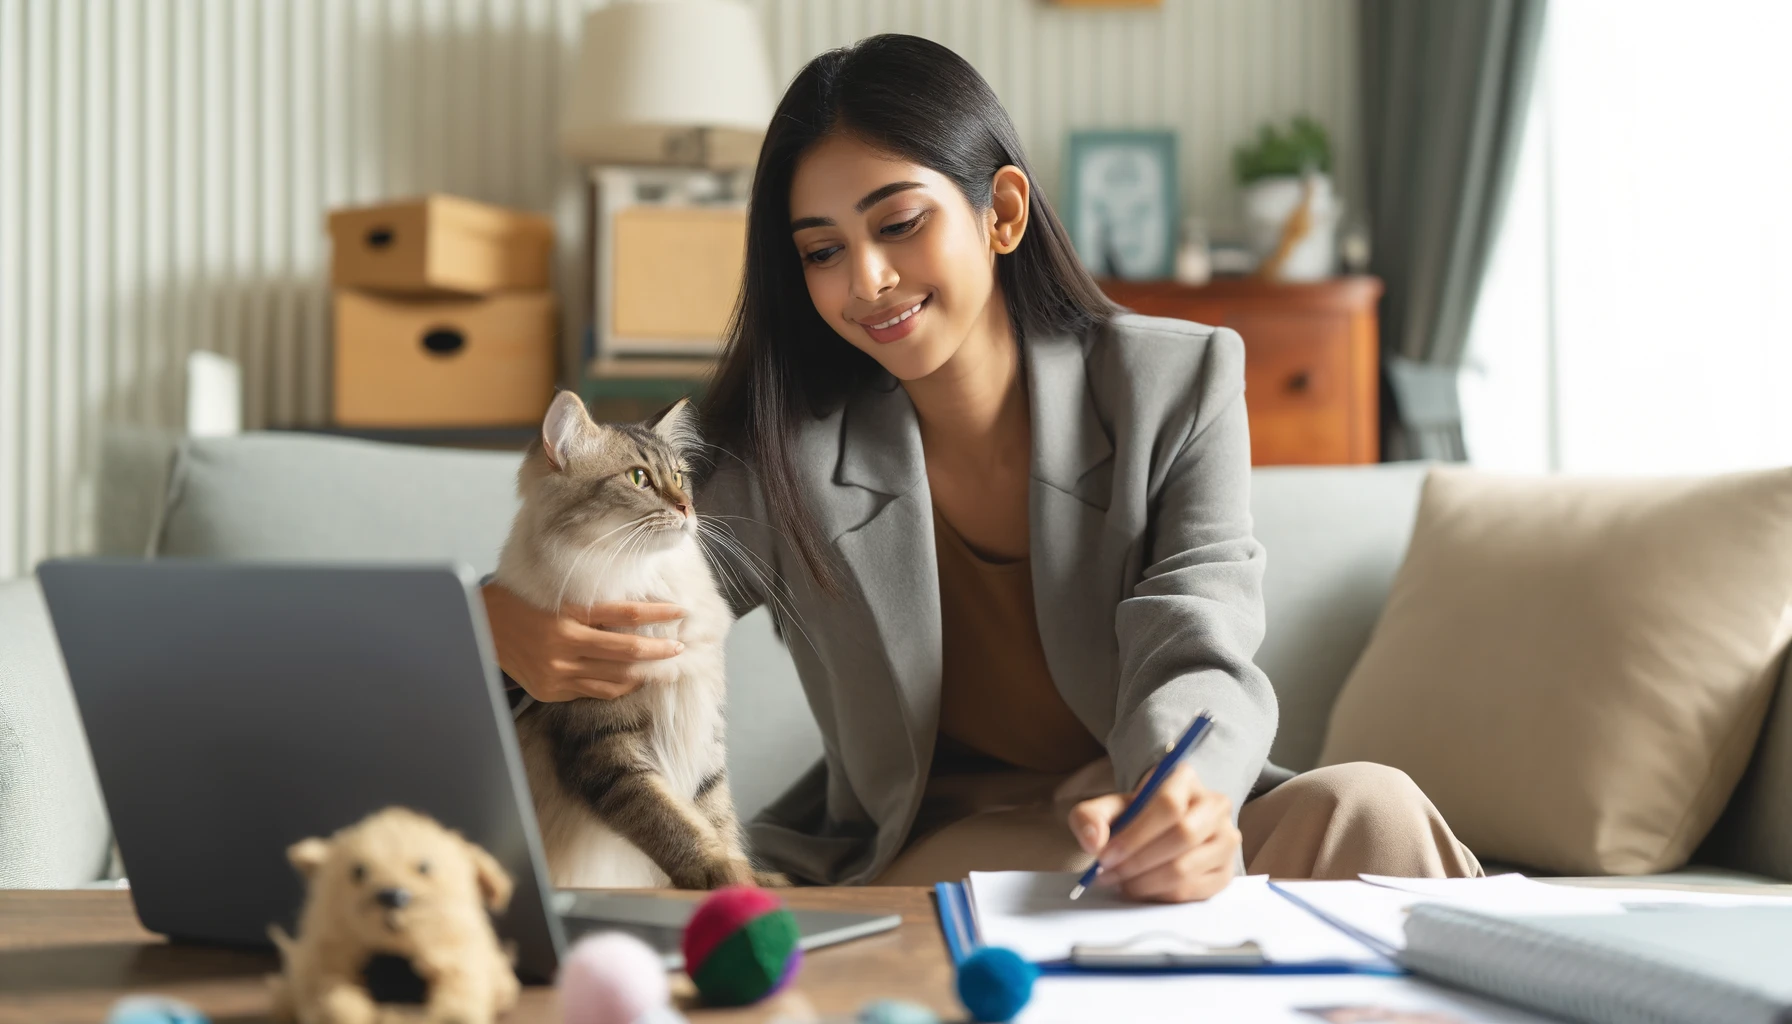 A realistic photograph of a South Asian woman interacting with a cat while writing notes. The setting is a cozy home office with a desk, laptop, and pet toys. The woman is smiling and focusing on the cat, creating a warm and professional atmosphere.